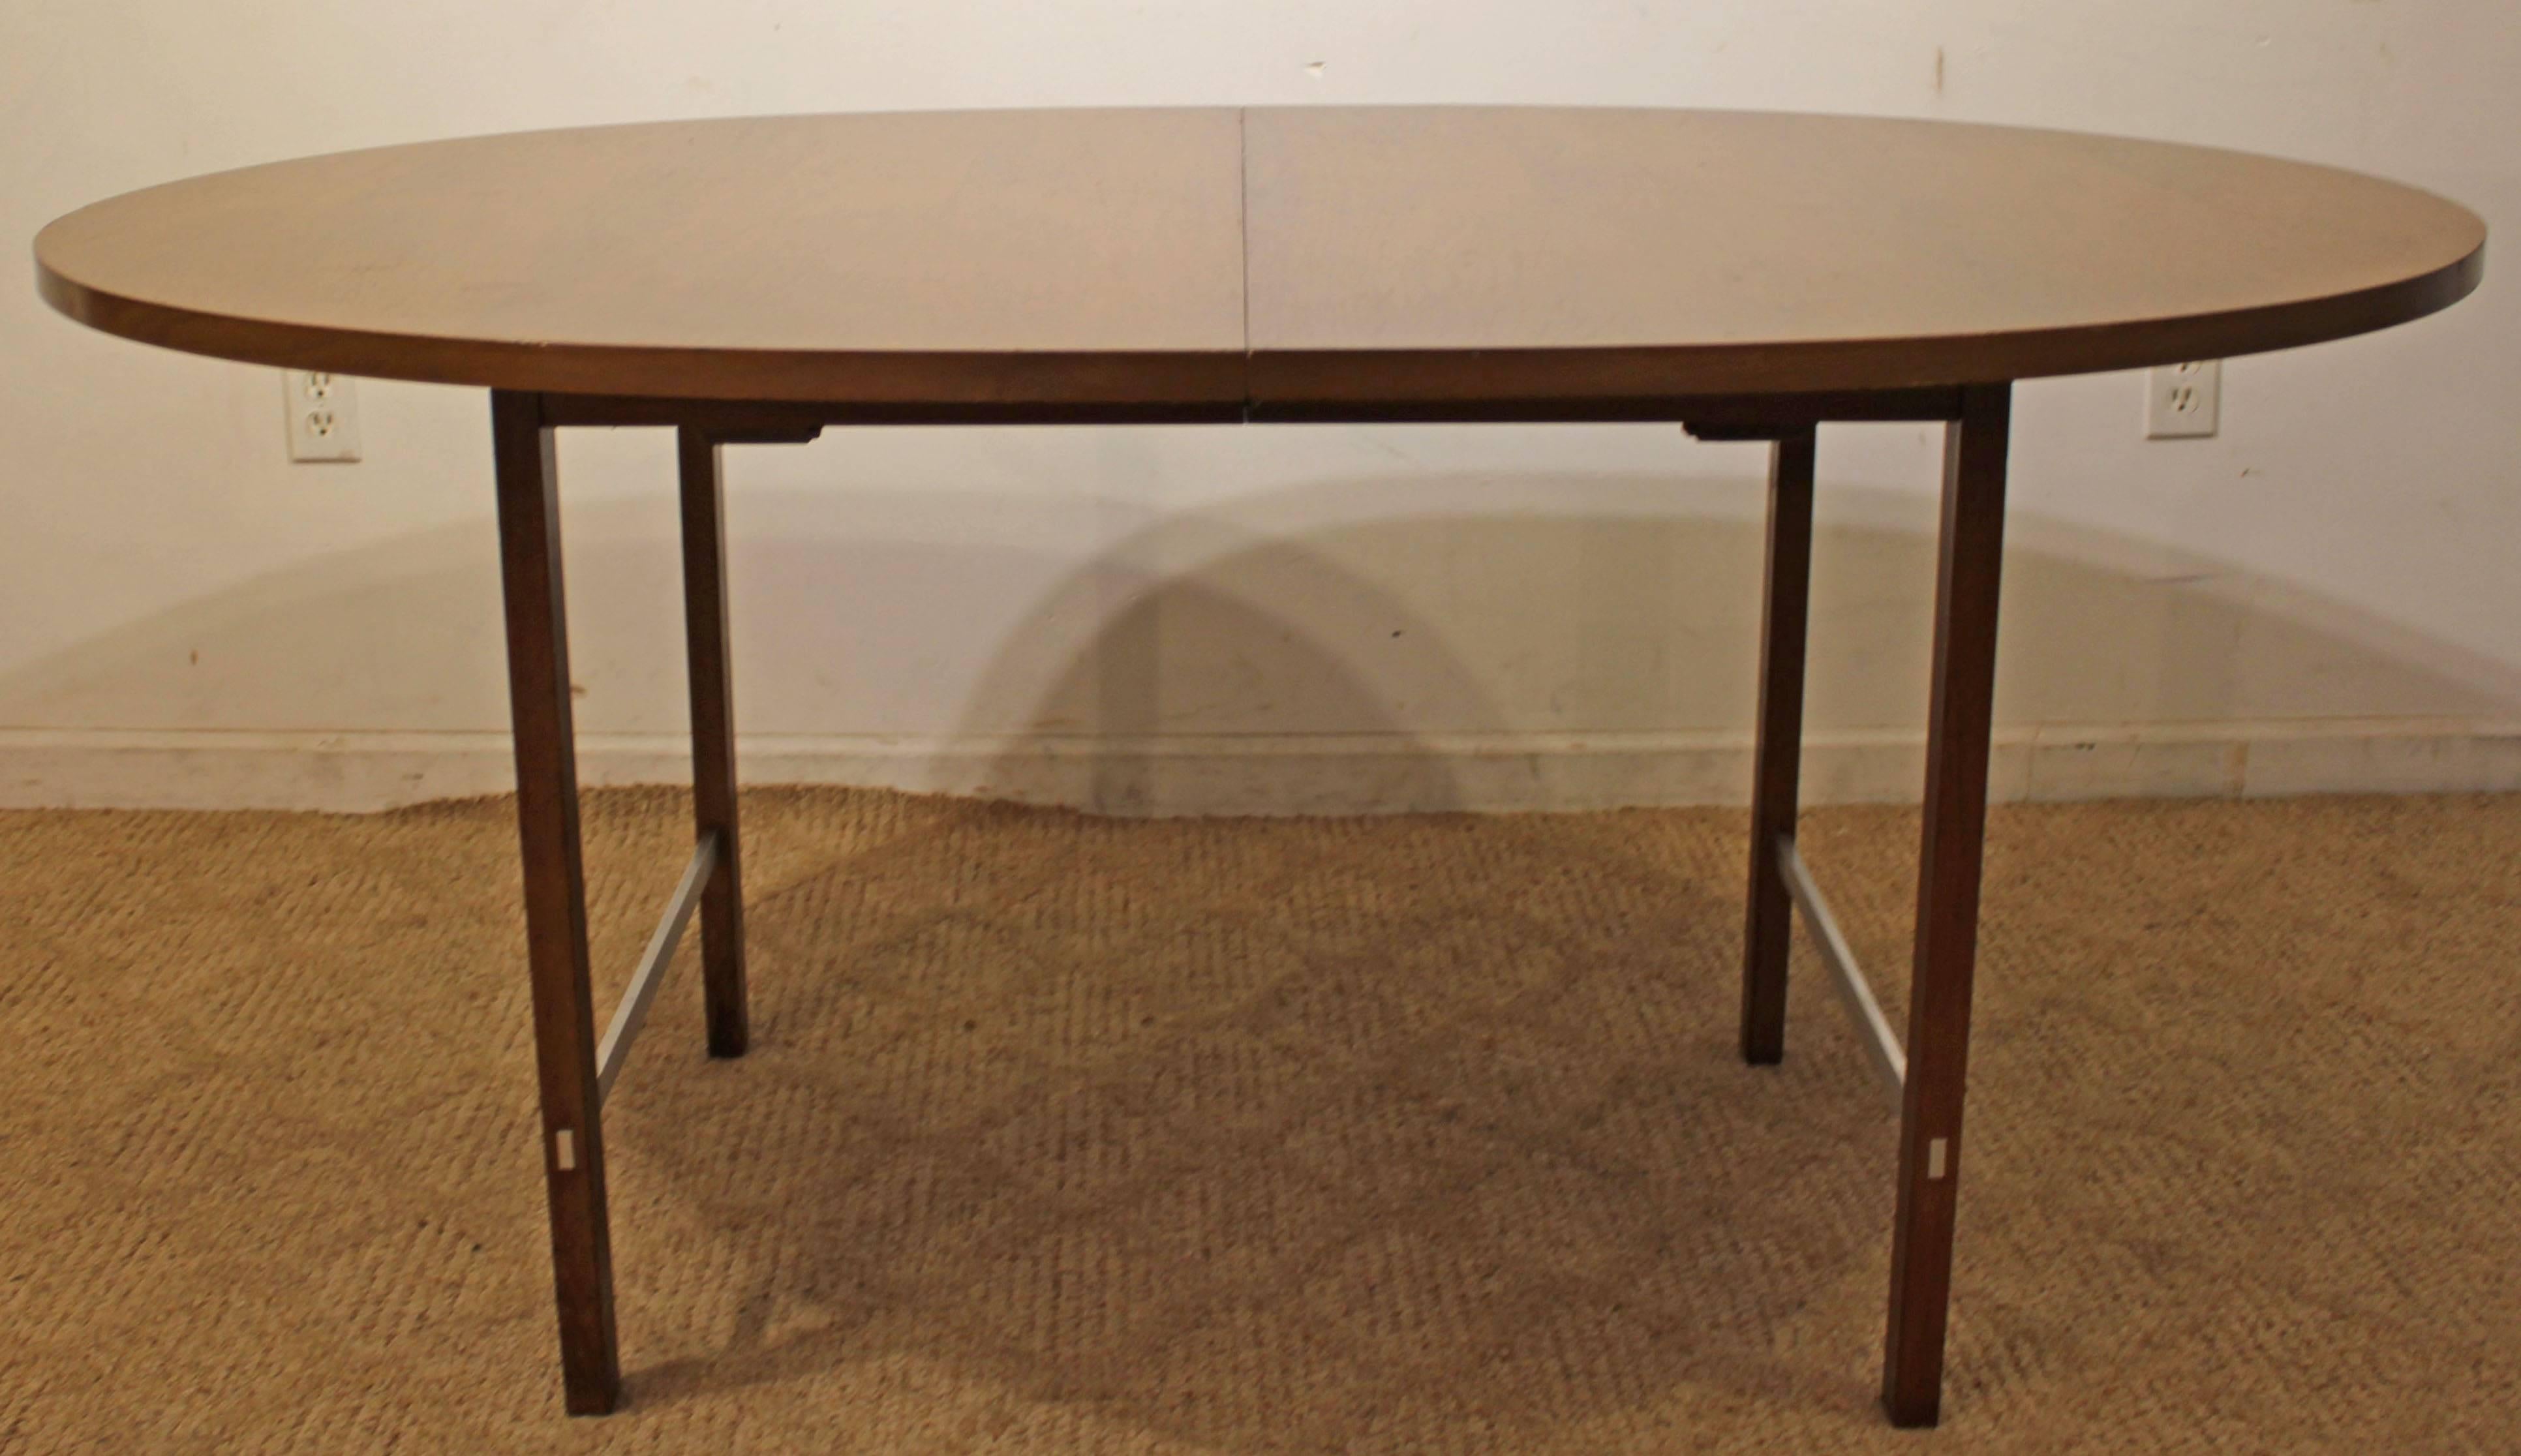 Designed by Paul McCobb for the Irwin collection by Calvin. The table is made of walnut with aluminium braces. Does not include table leaves.